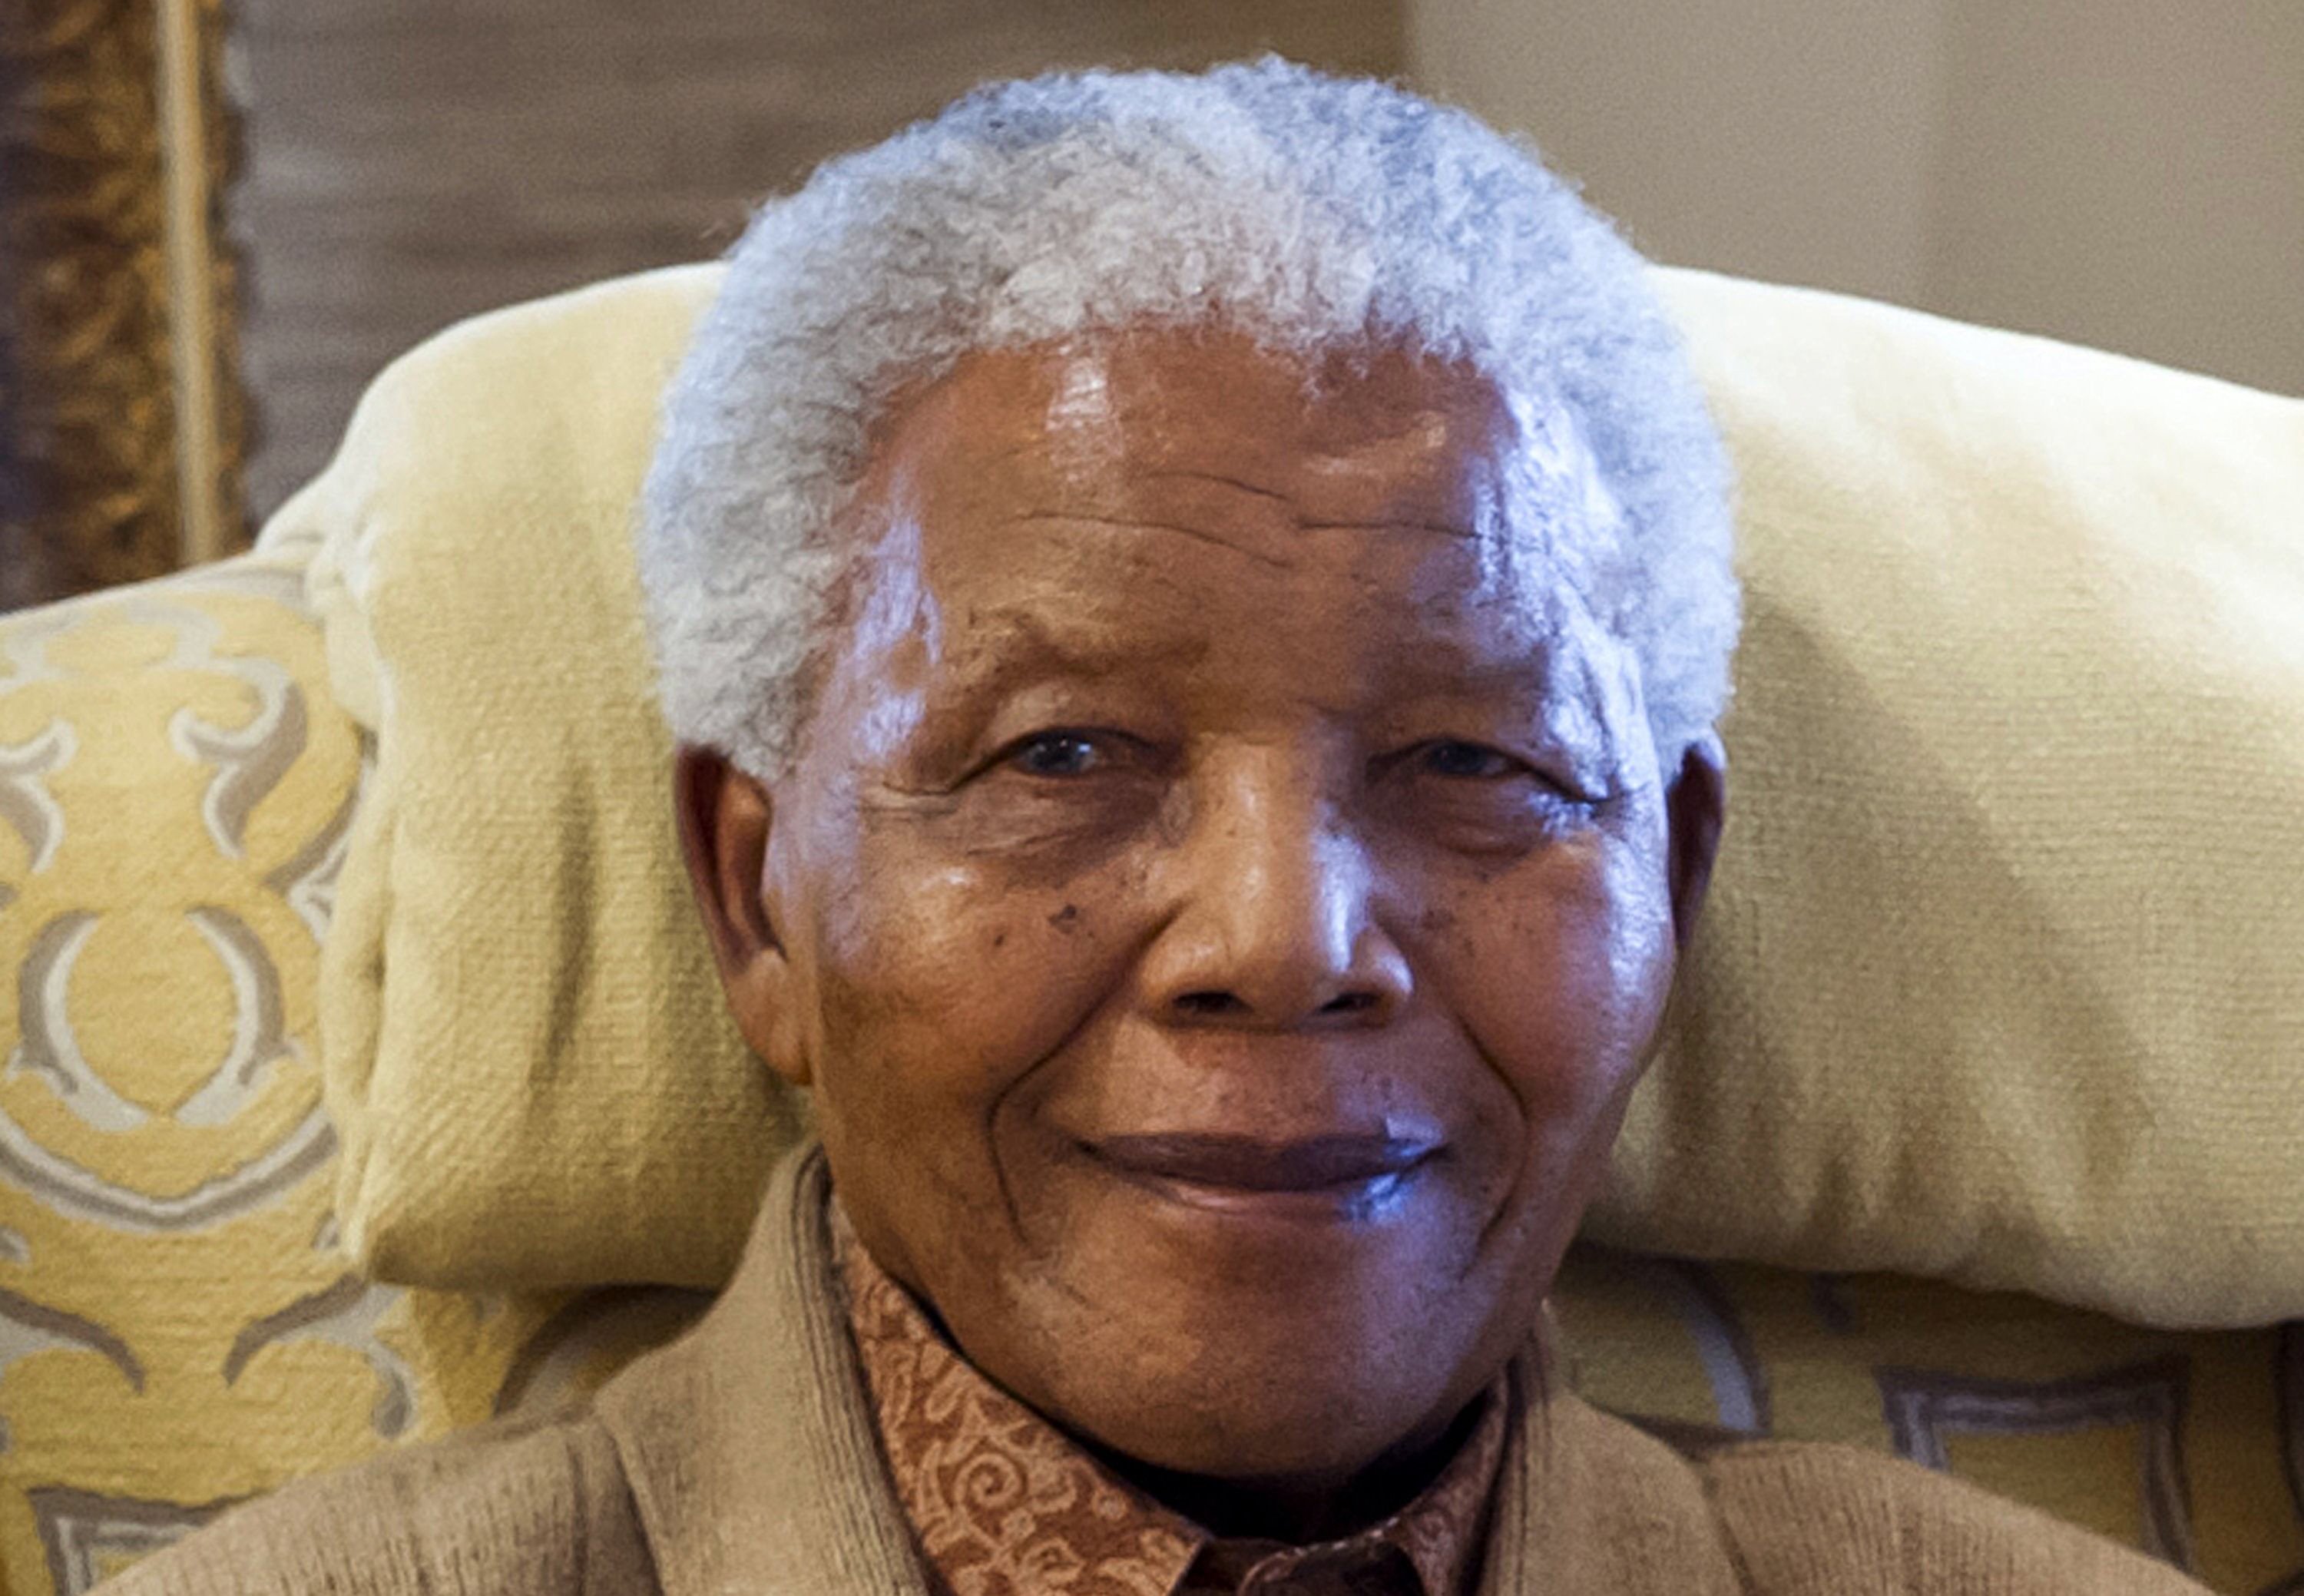 file photo of former south african president nelson mandela is pictured during a visit by former us president on july 17 2012 at his home in qunu eastern cape on the eve of his 94th birthday photo afp clinton foundation barbara kinney